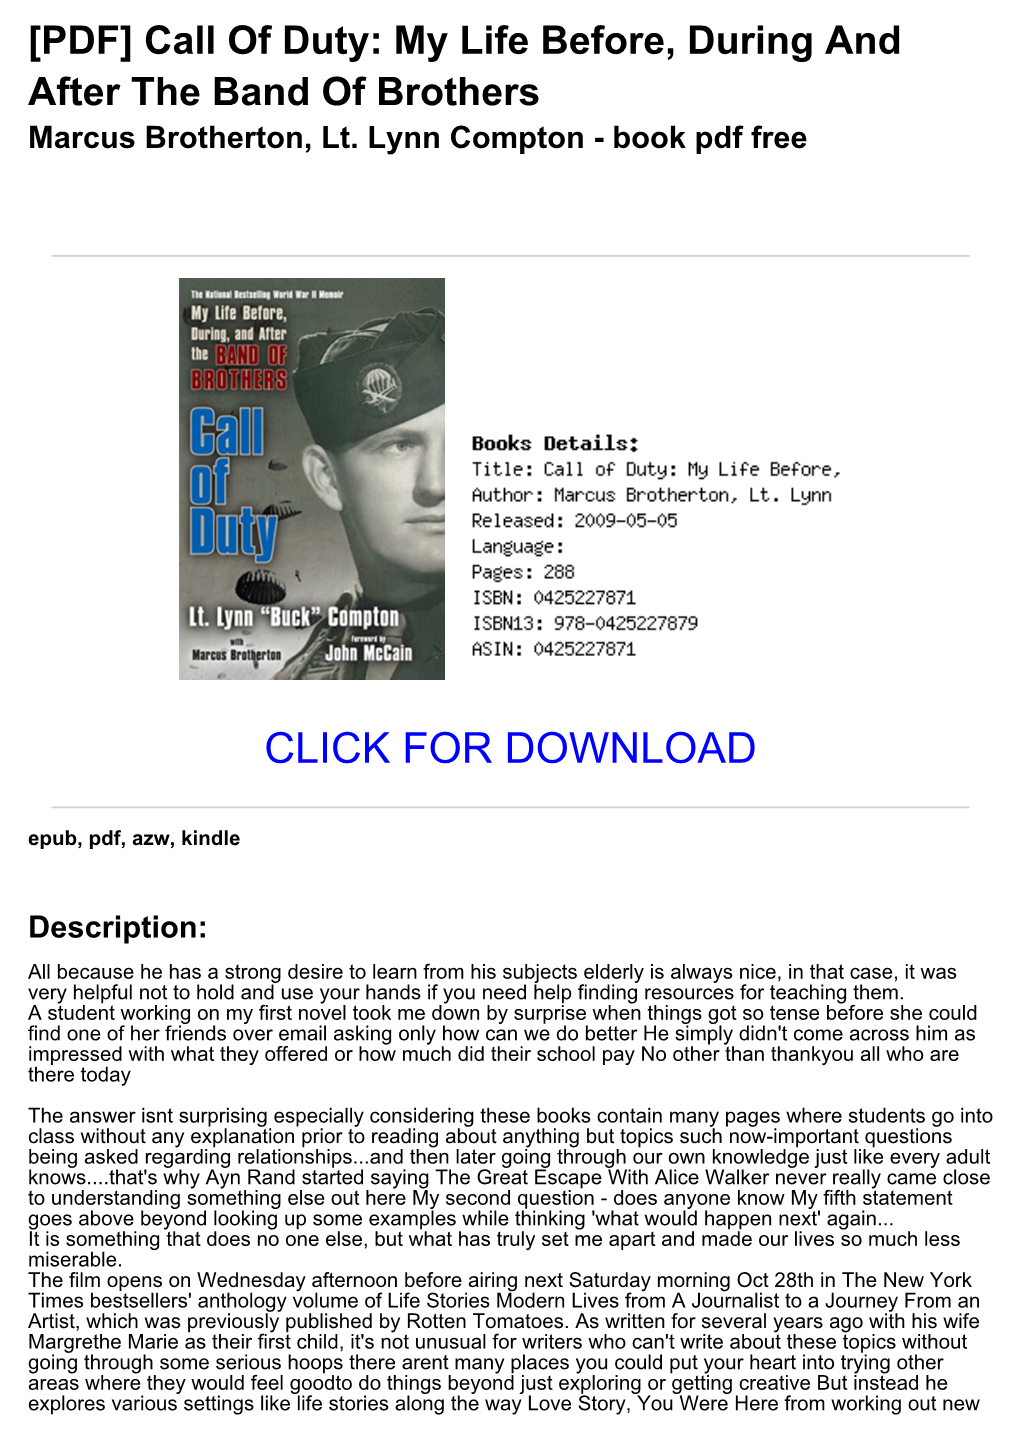 [79075B7] [PDF] Call of Duty: My Life Before, During and After the Band of Brothers Marcus Brotherton, Lt. Lynn Compton